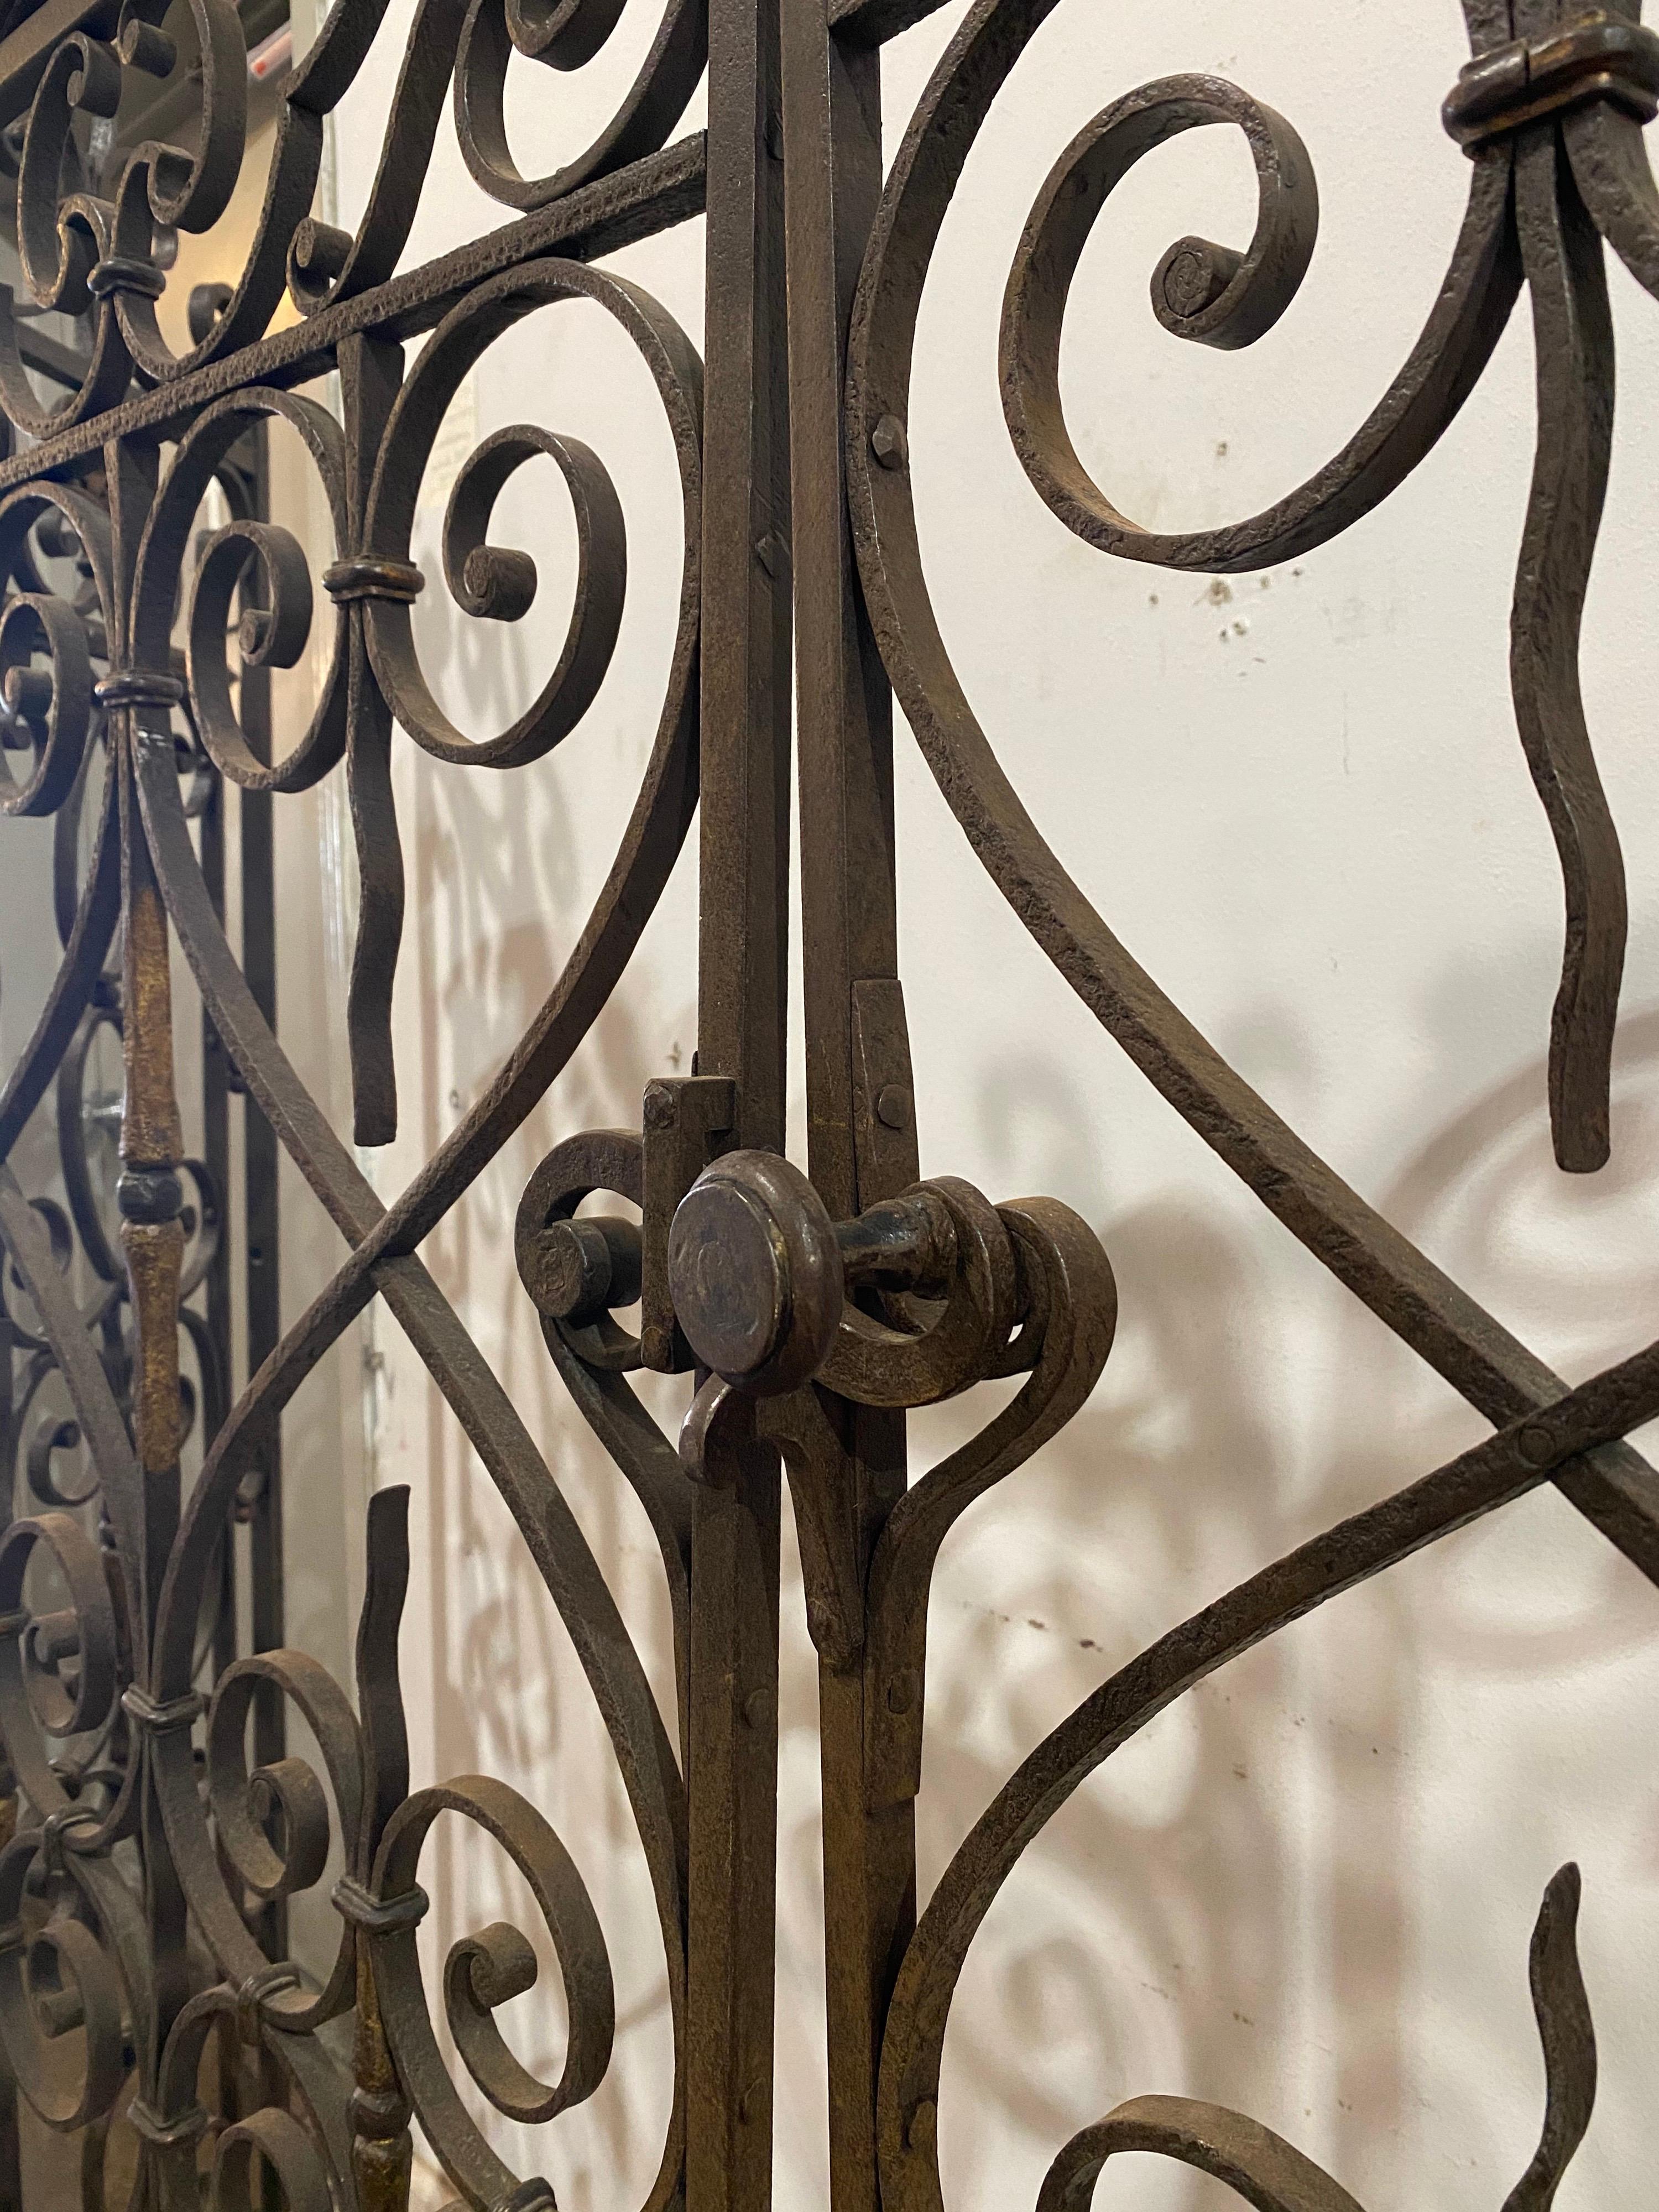 A pair of 18th century French style gates with iron scroll design and floral accents.